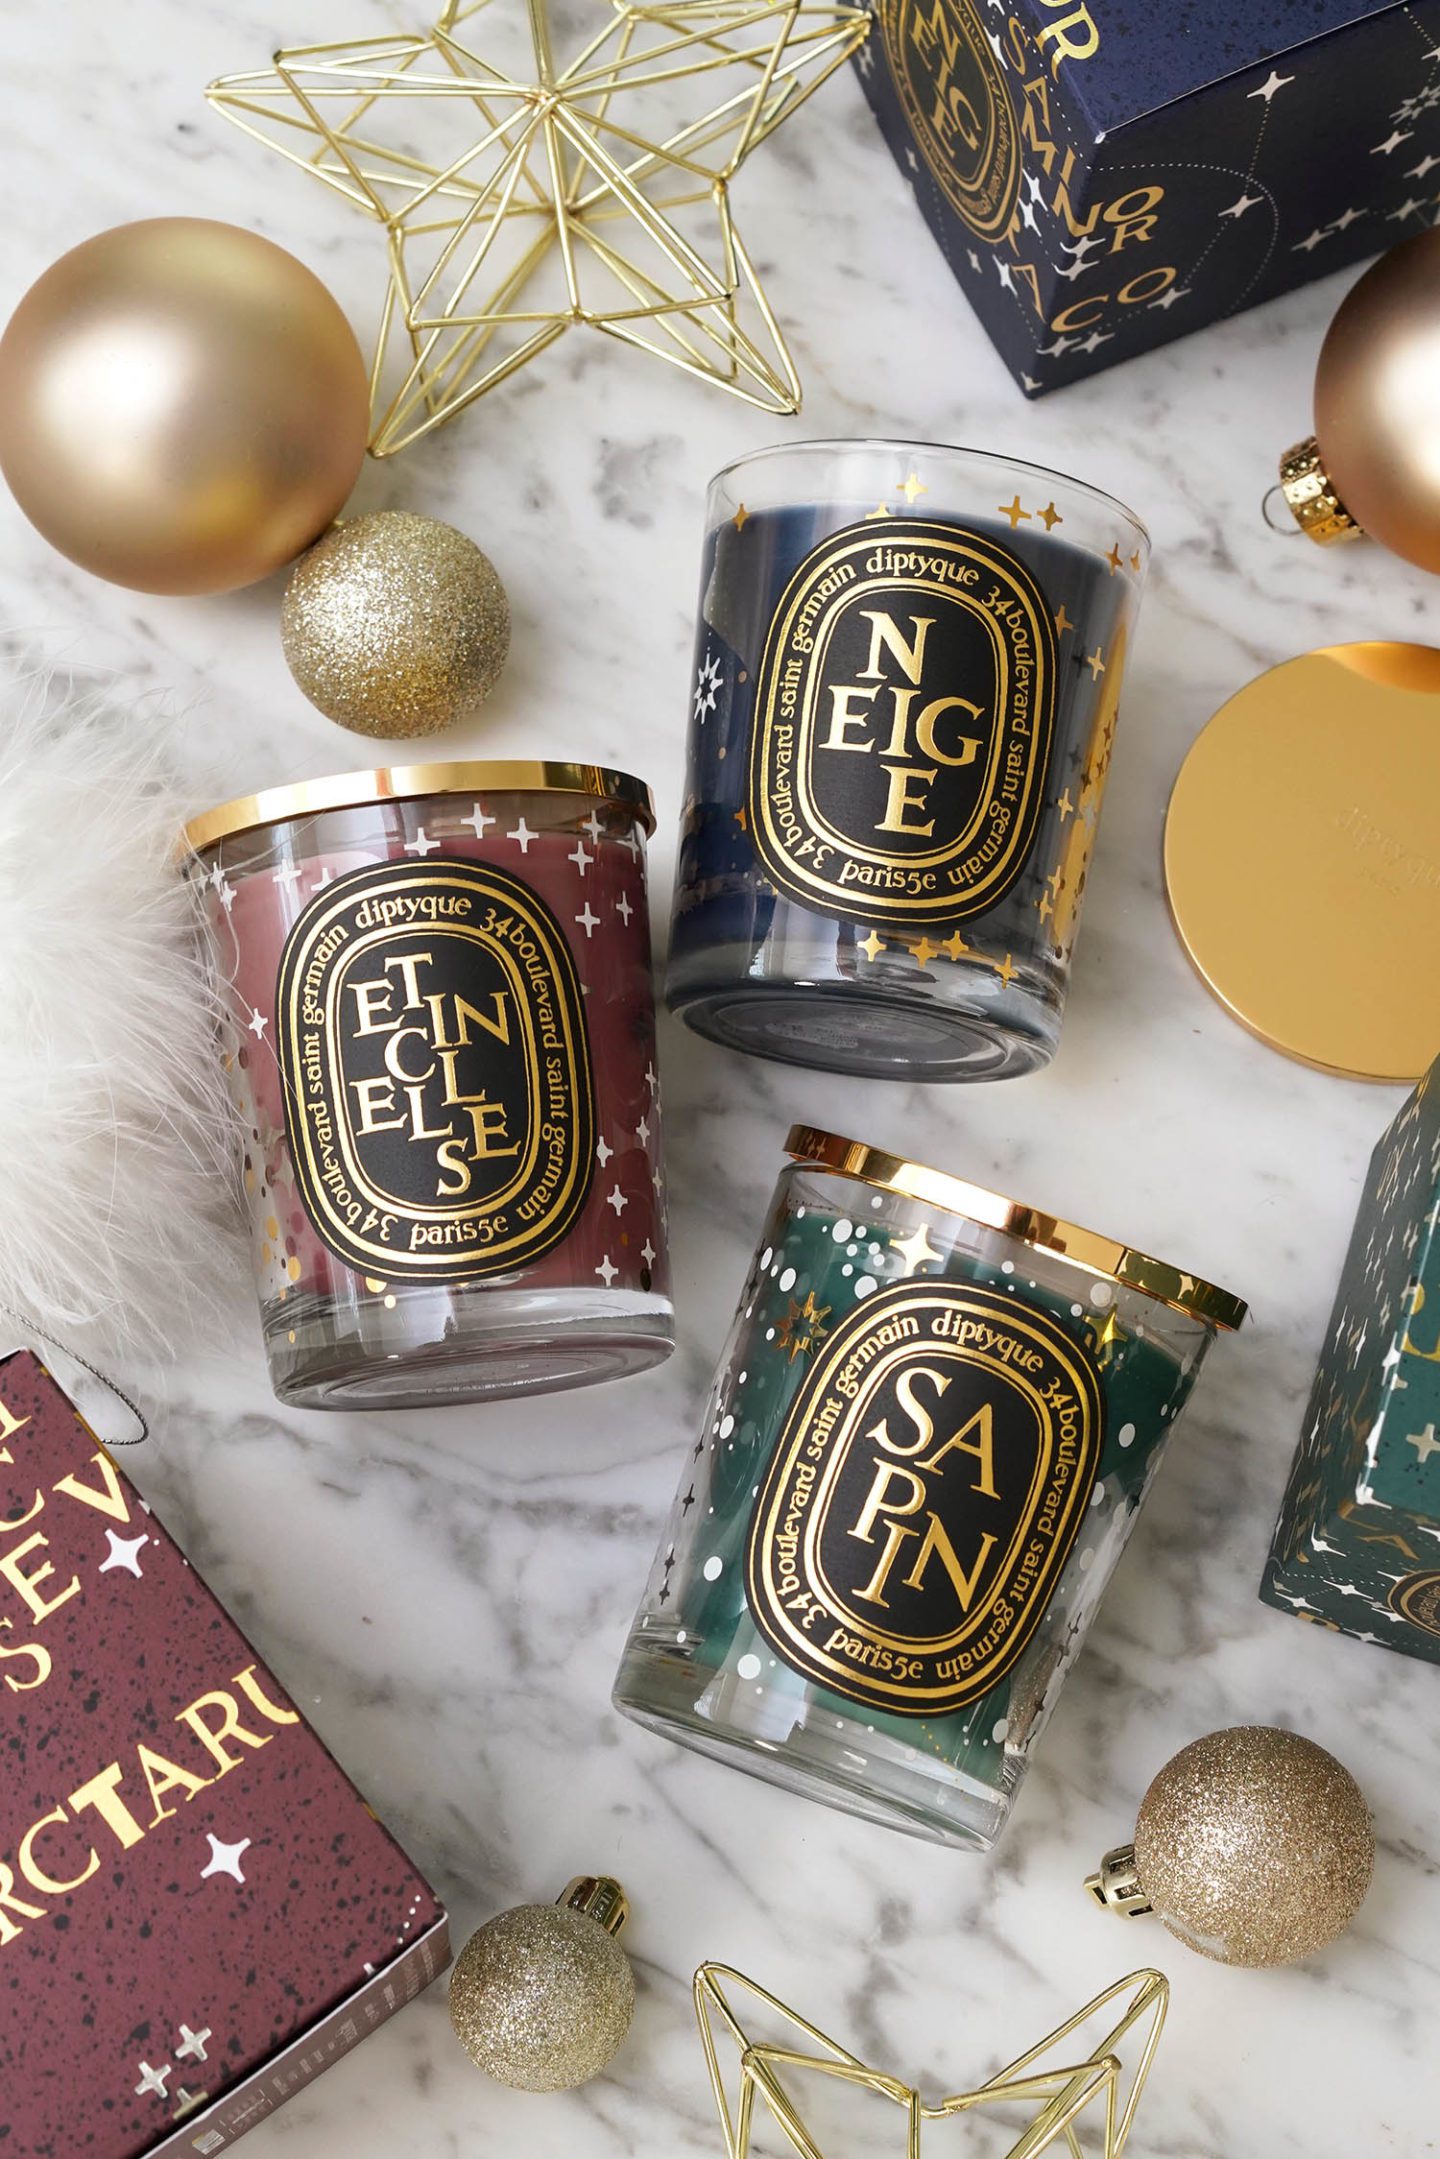 Diptyque Holiday Candles 2022 Sapin, Neige, Etincelles